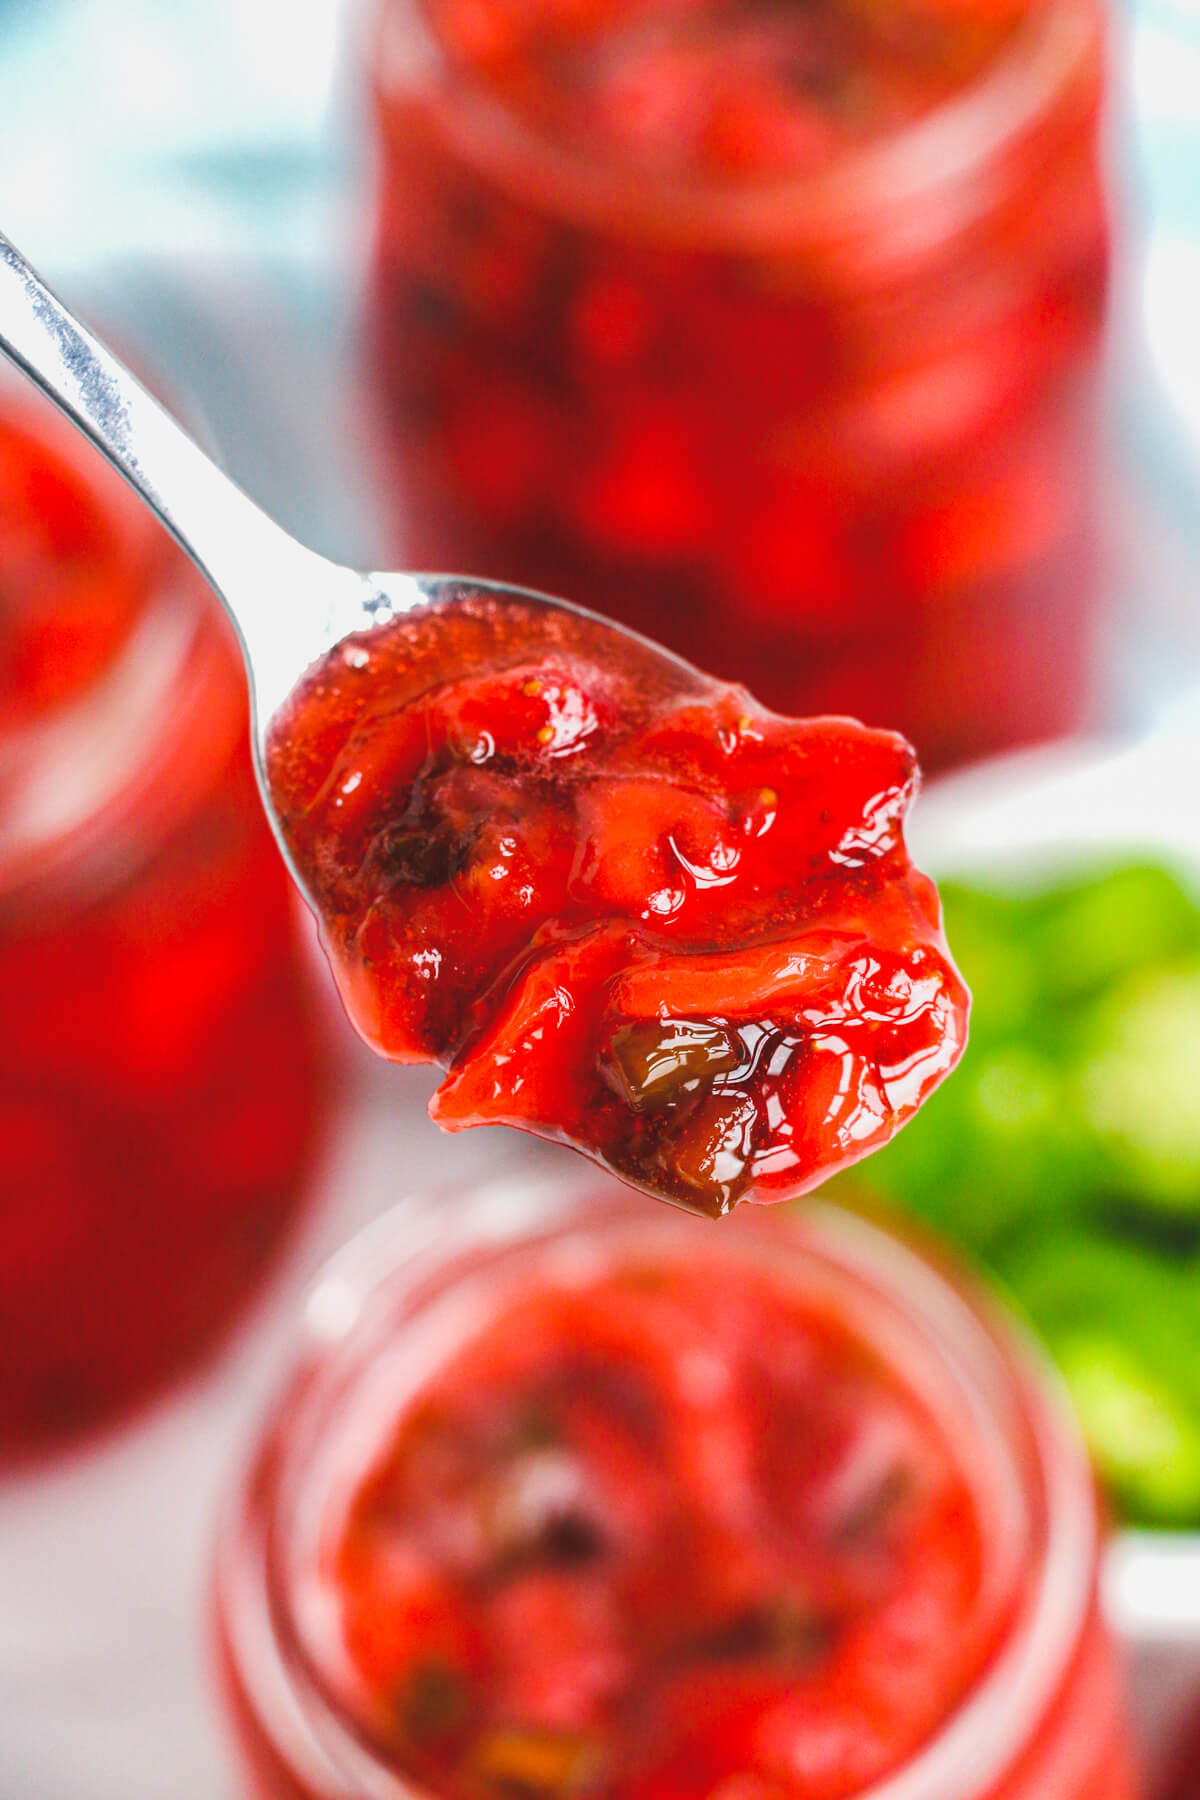 A silver spoon containing Strawberry Jalapeño jam over an open jar of the same jam.